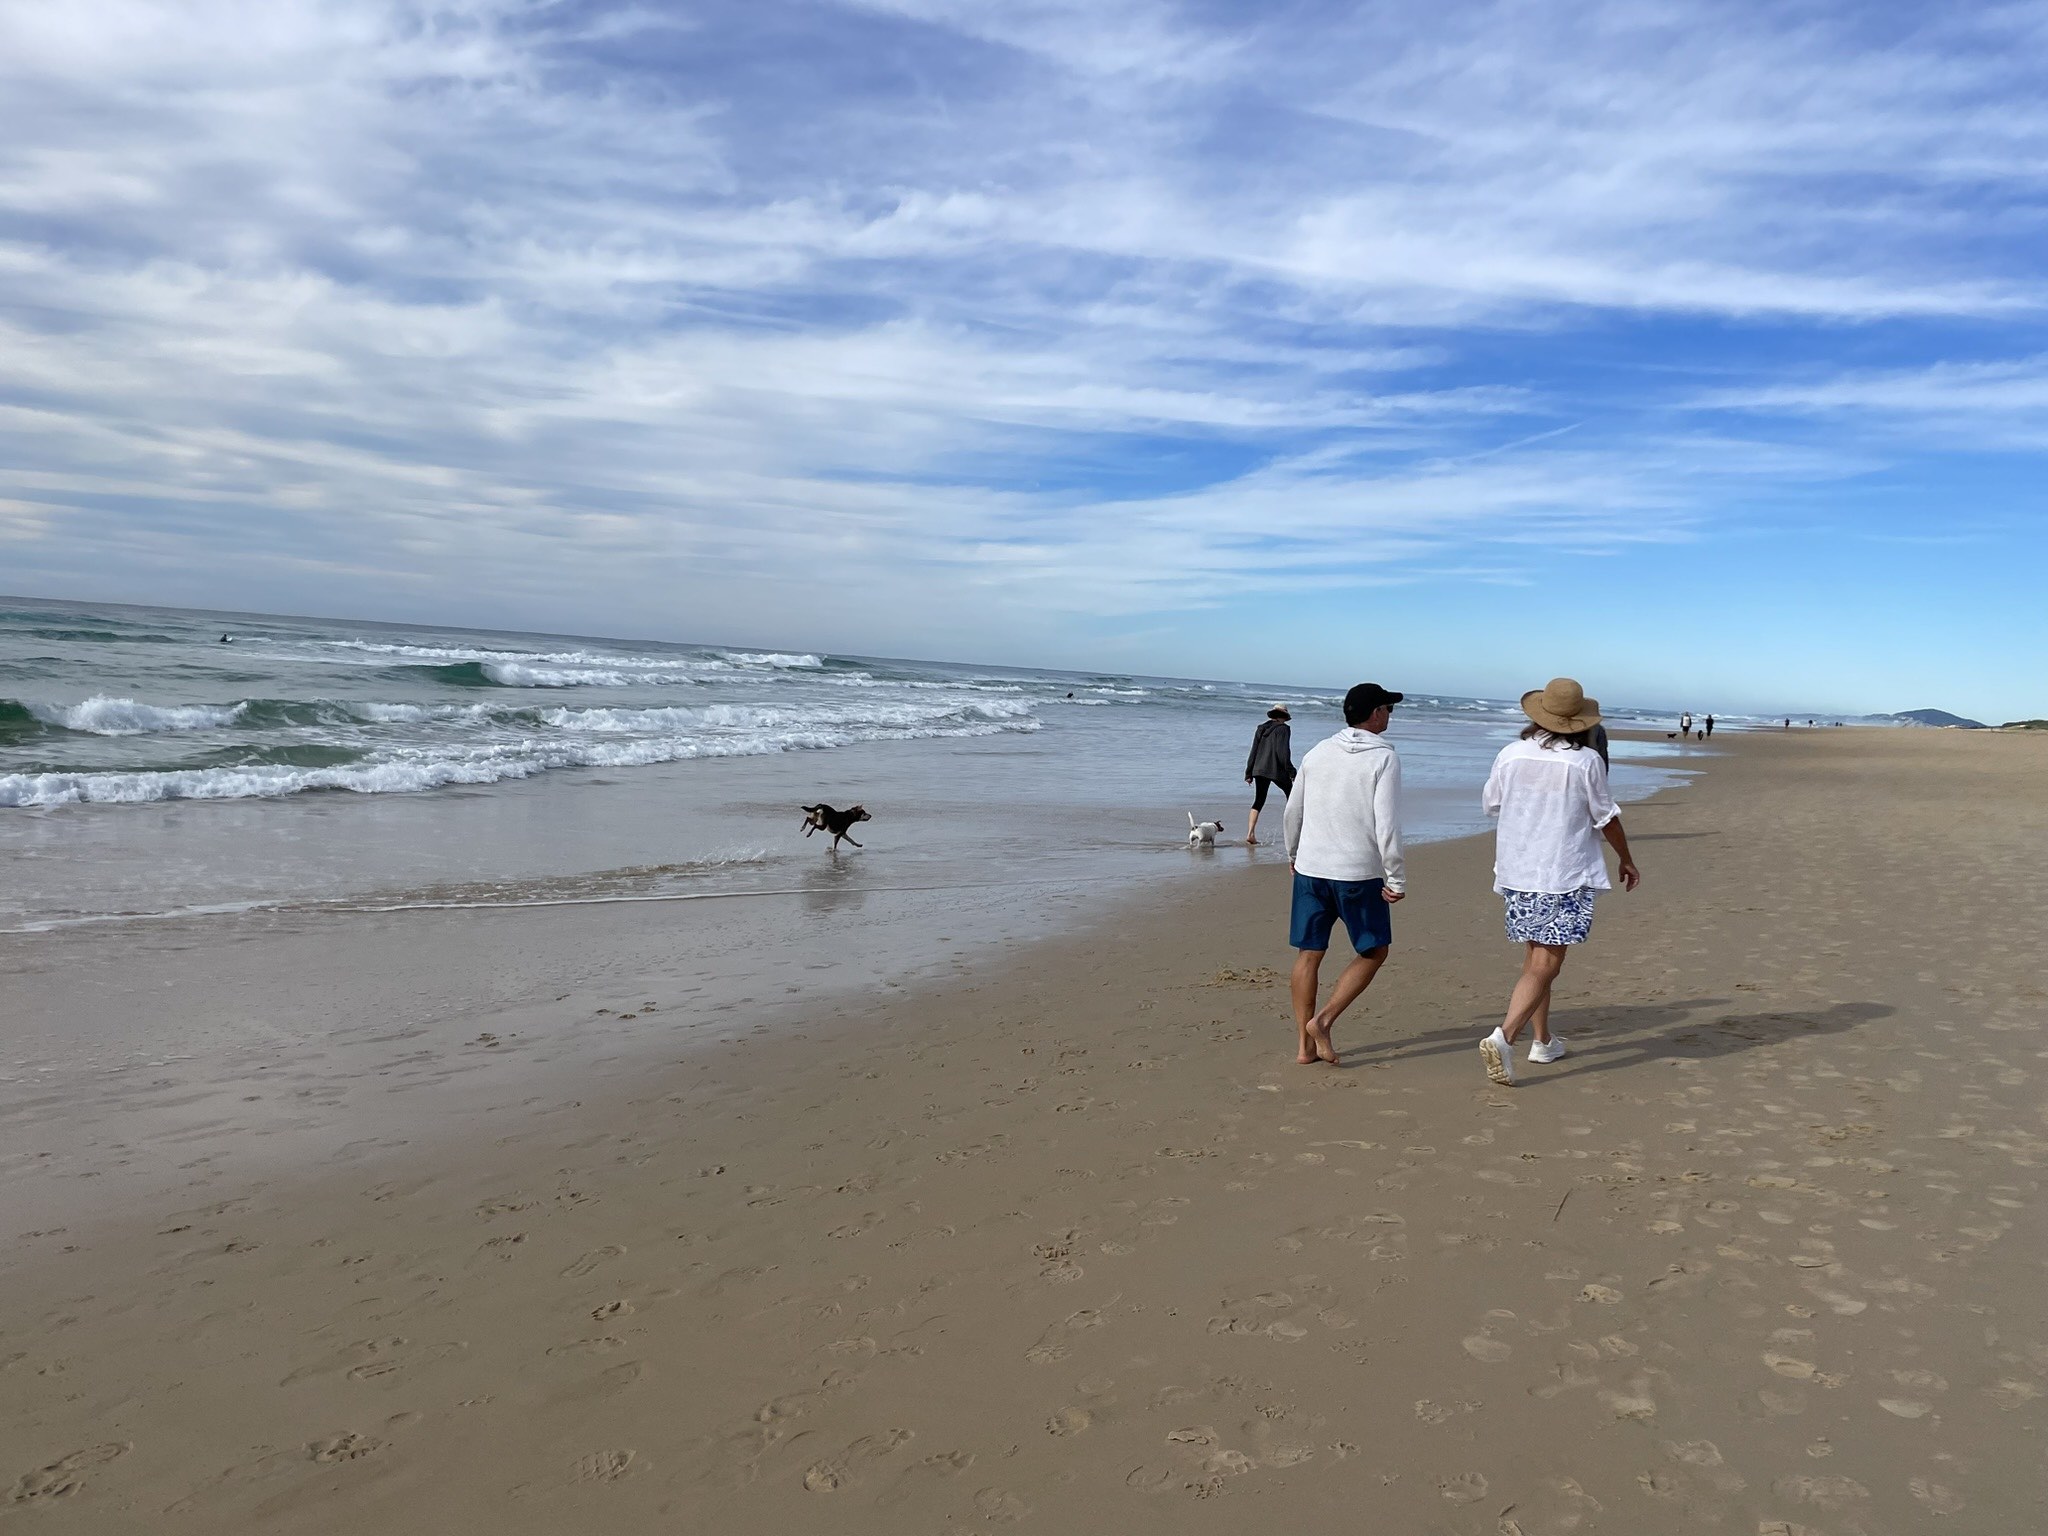 North End of Sunshine Beach  with people walking their doggies